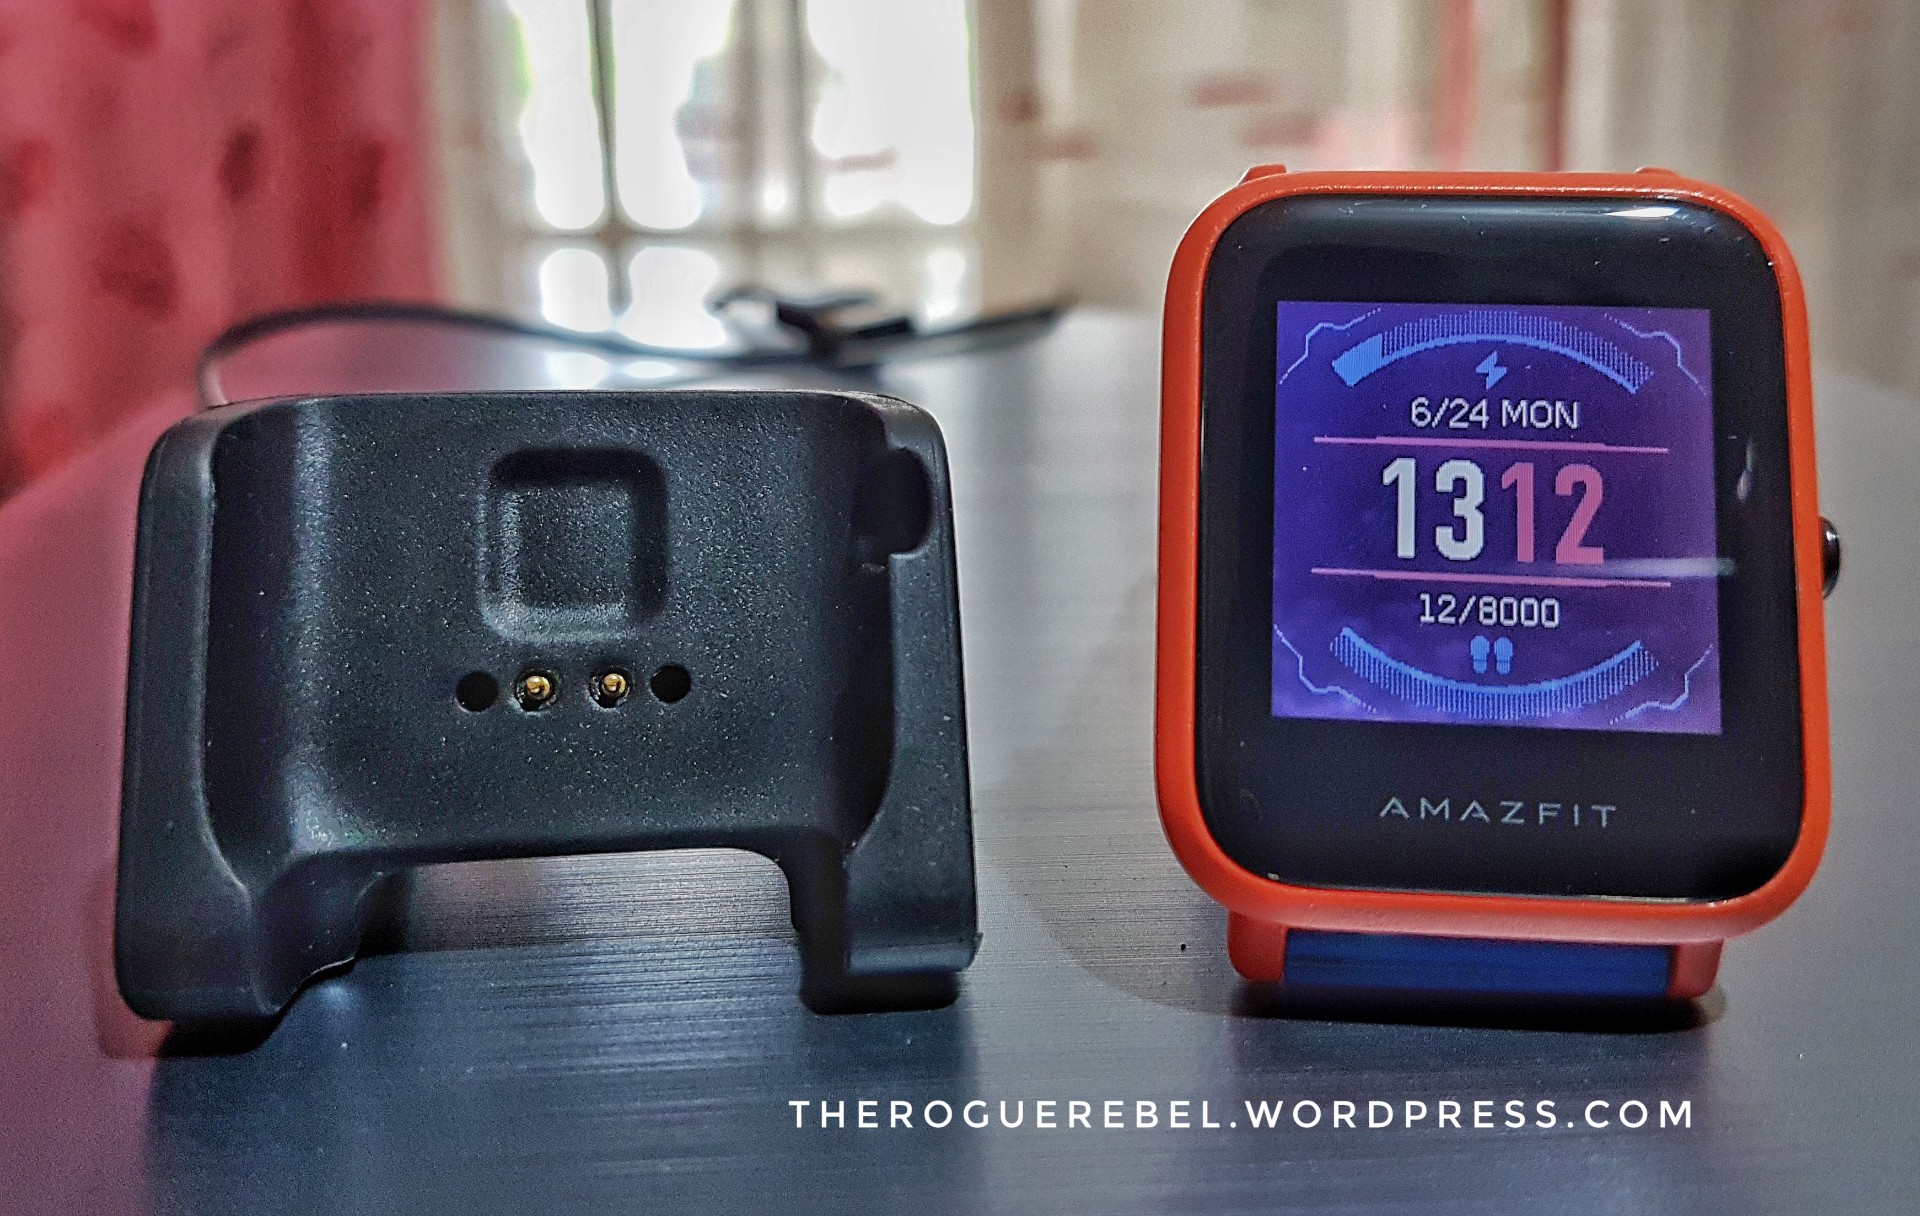 One Year Later Review: Xiaomi Huami Amazfit Bip – The Rogue Rebel….